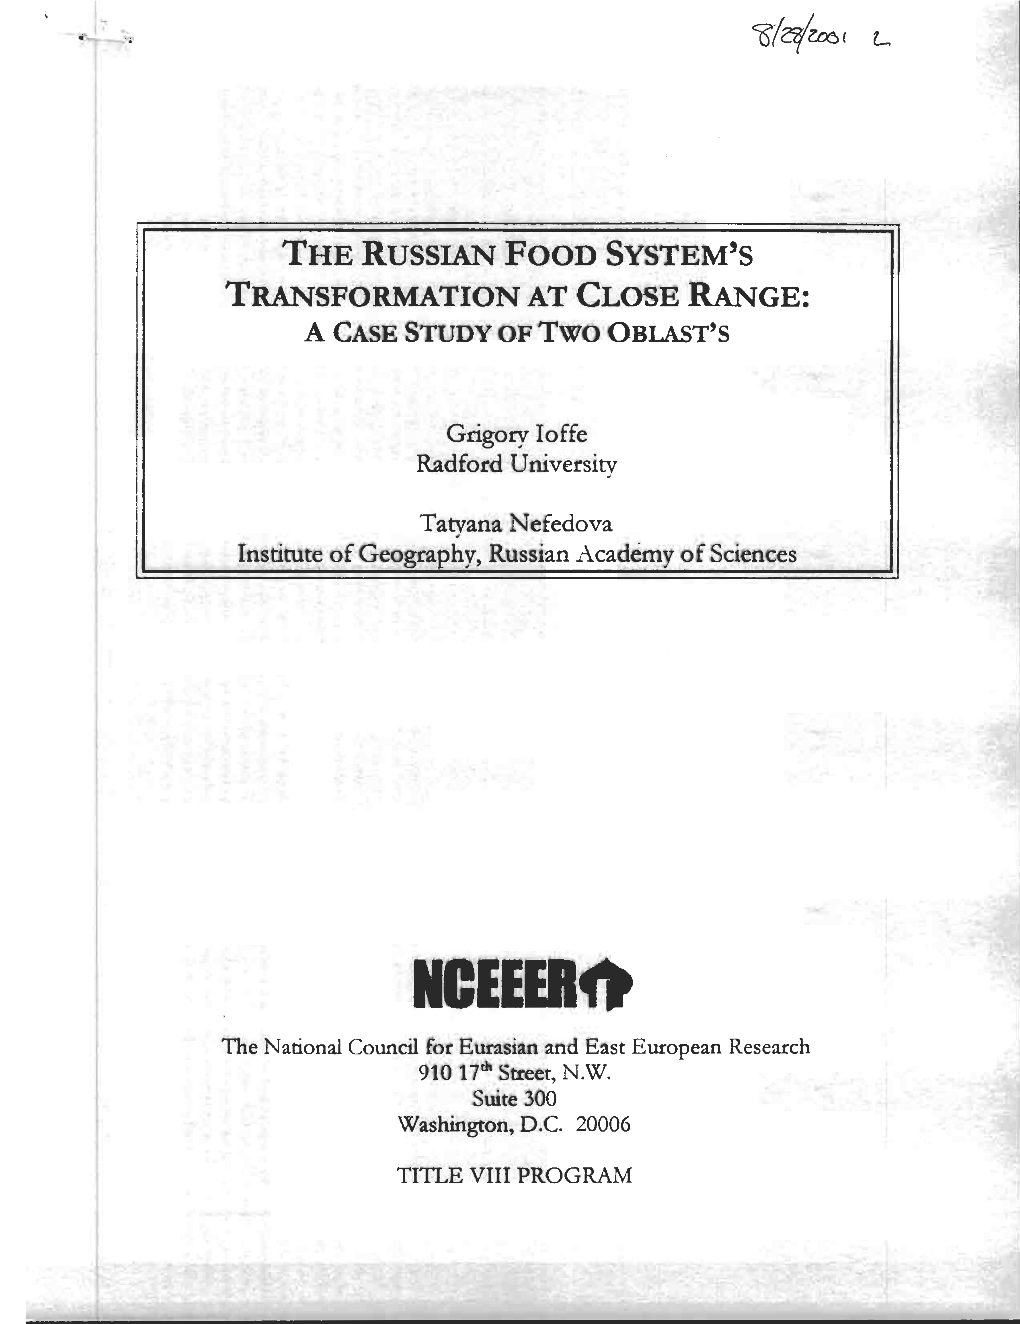 The Russian Food System's Transformation at Close Range: a Case Study of Two Oblast's